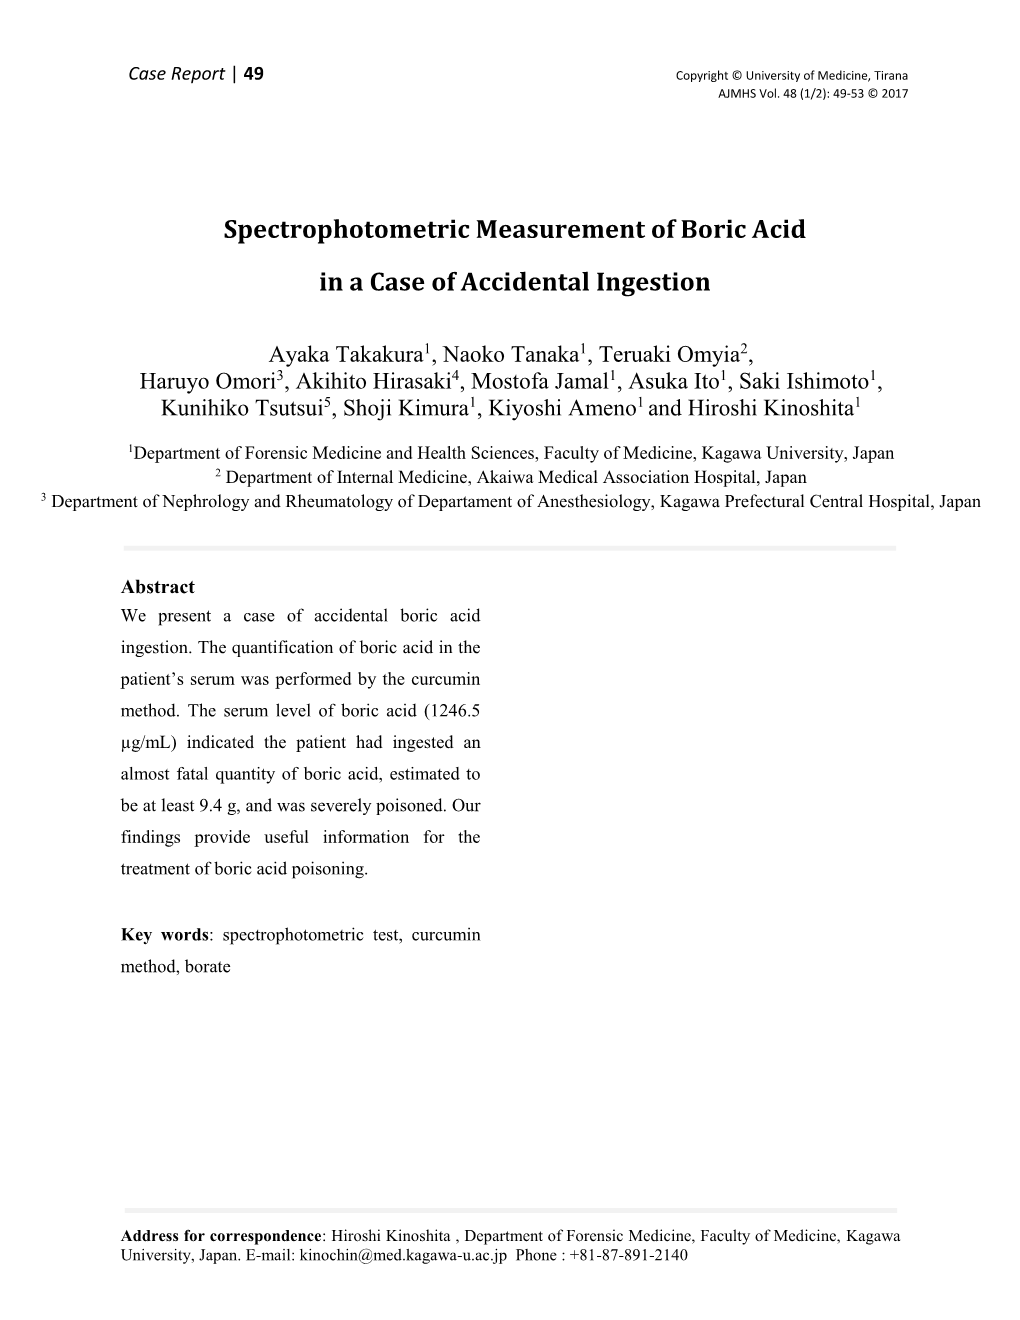 Spectrophotometric Measurement of Boric Acid in a Case of Accidental Ingestion